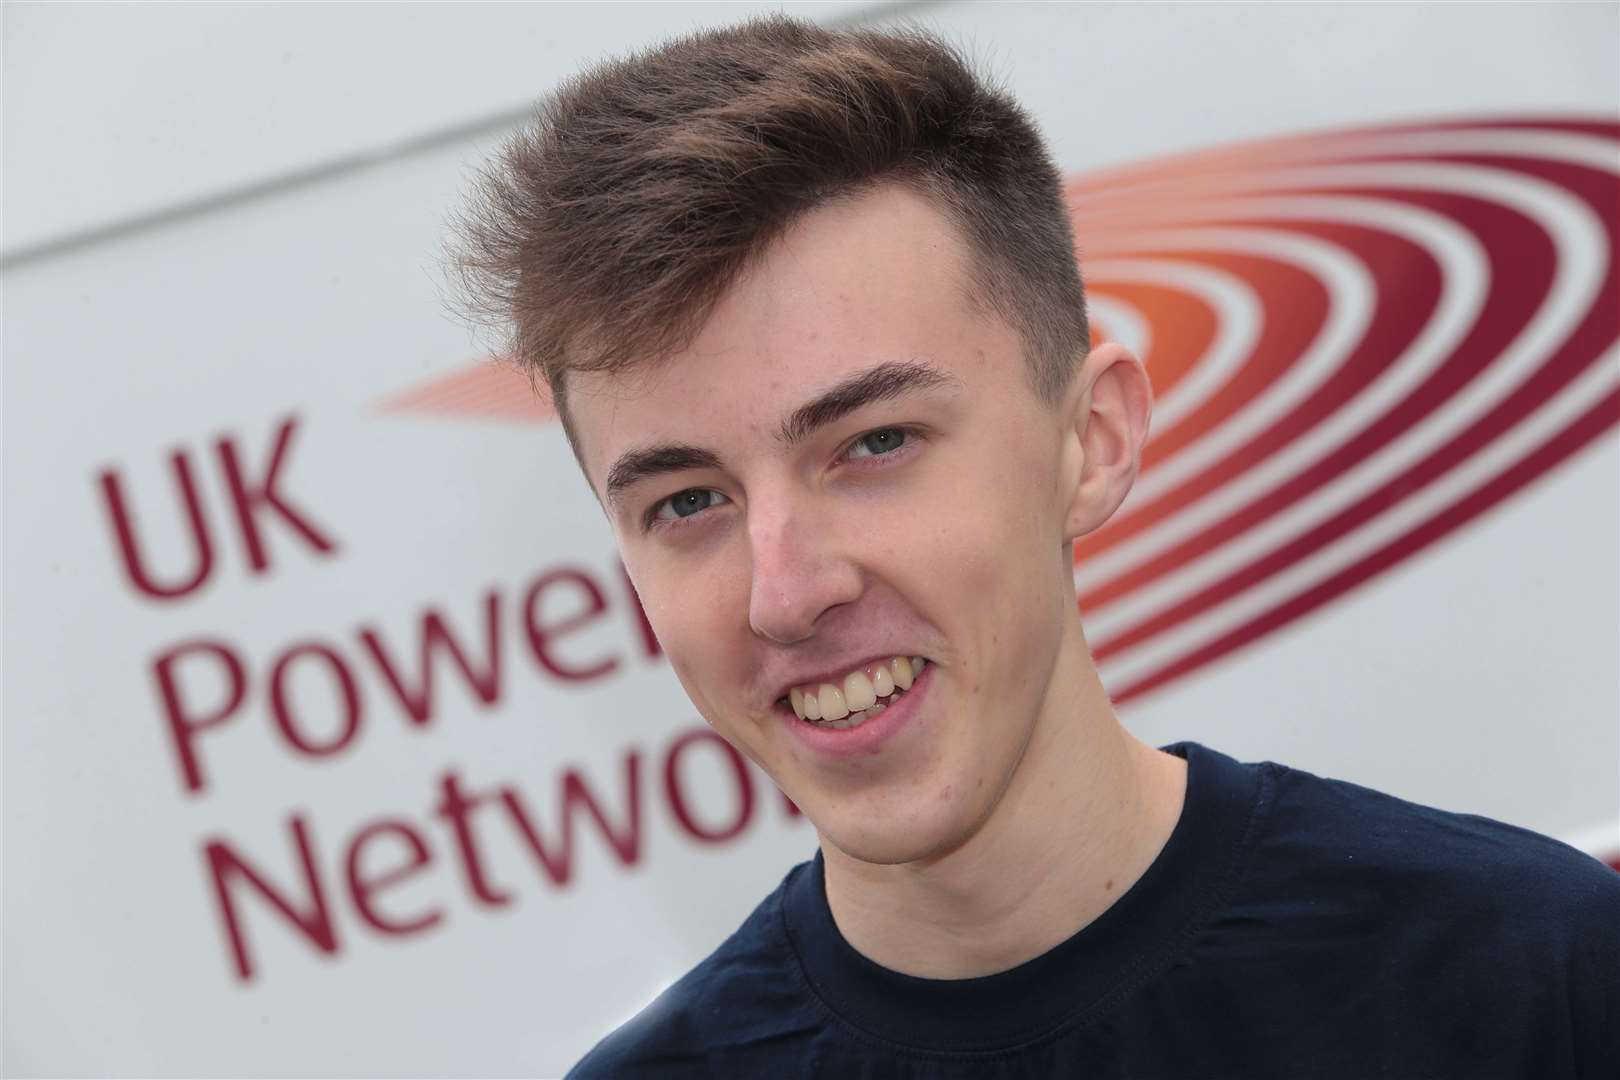 Joe Lewis recently completed a Gold Duke of Edinburgh Award as part of his apprenticeship training at UK Power Networks Services. Picture: Nigel Bowles